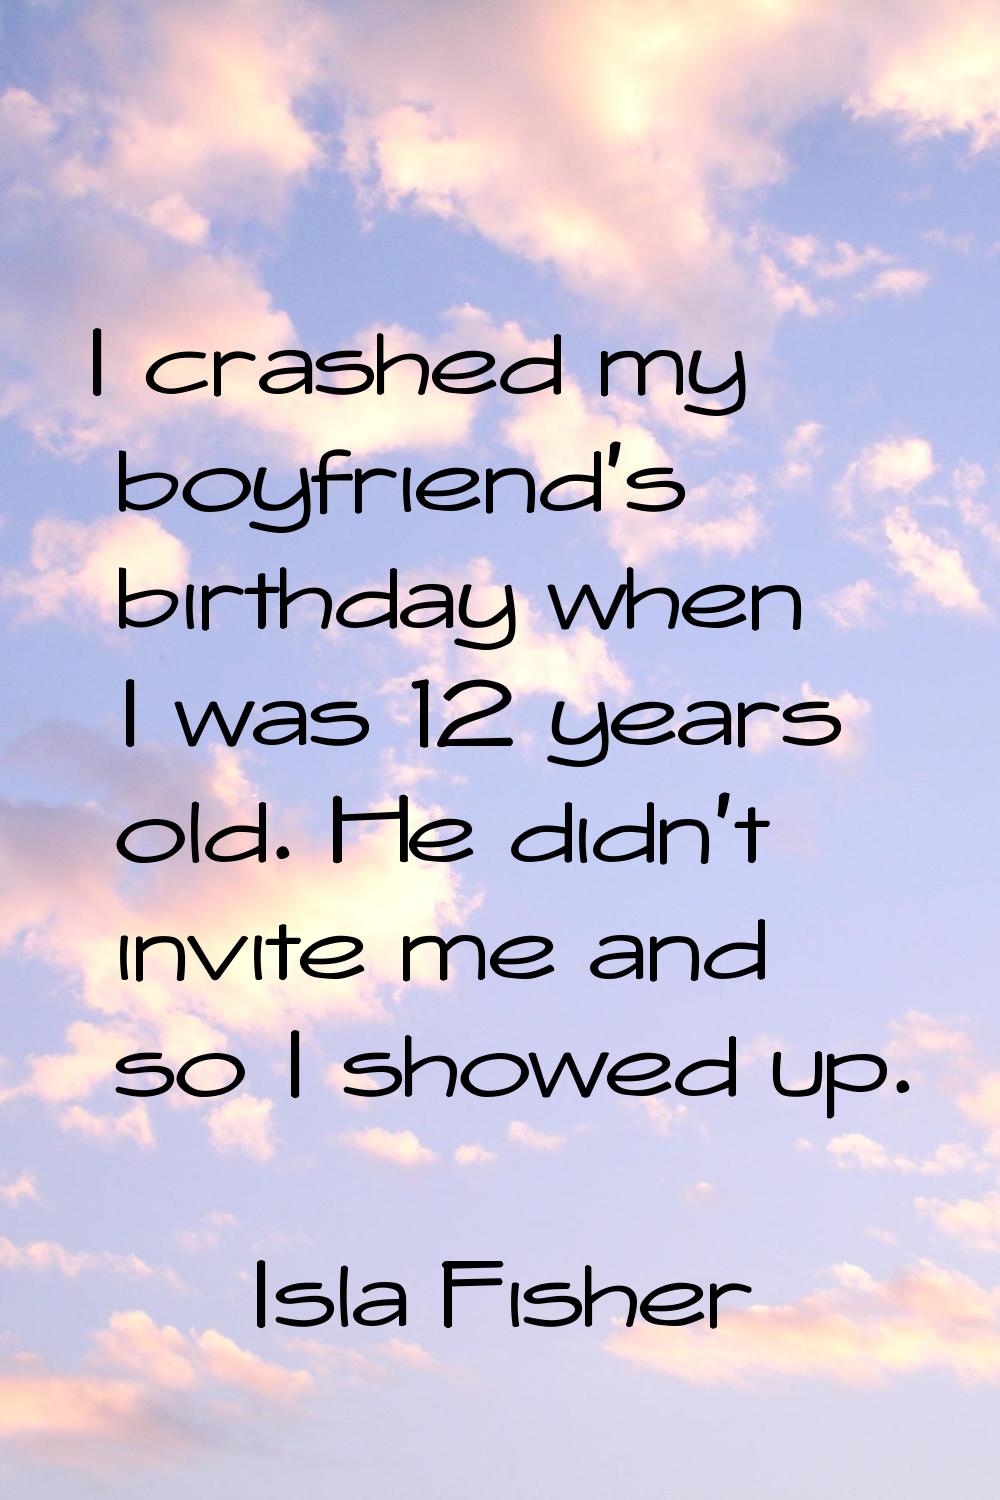 I crashed my boyfriend's birthday when I was 12 years old. He didn't invite me and so I showed up.